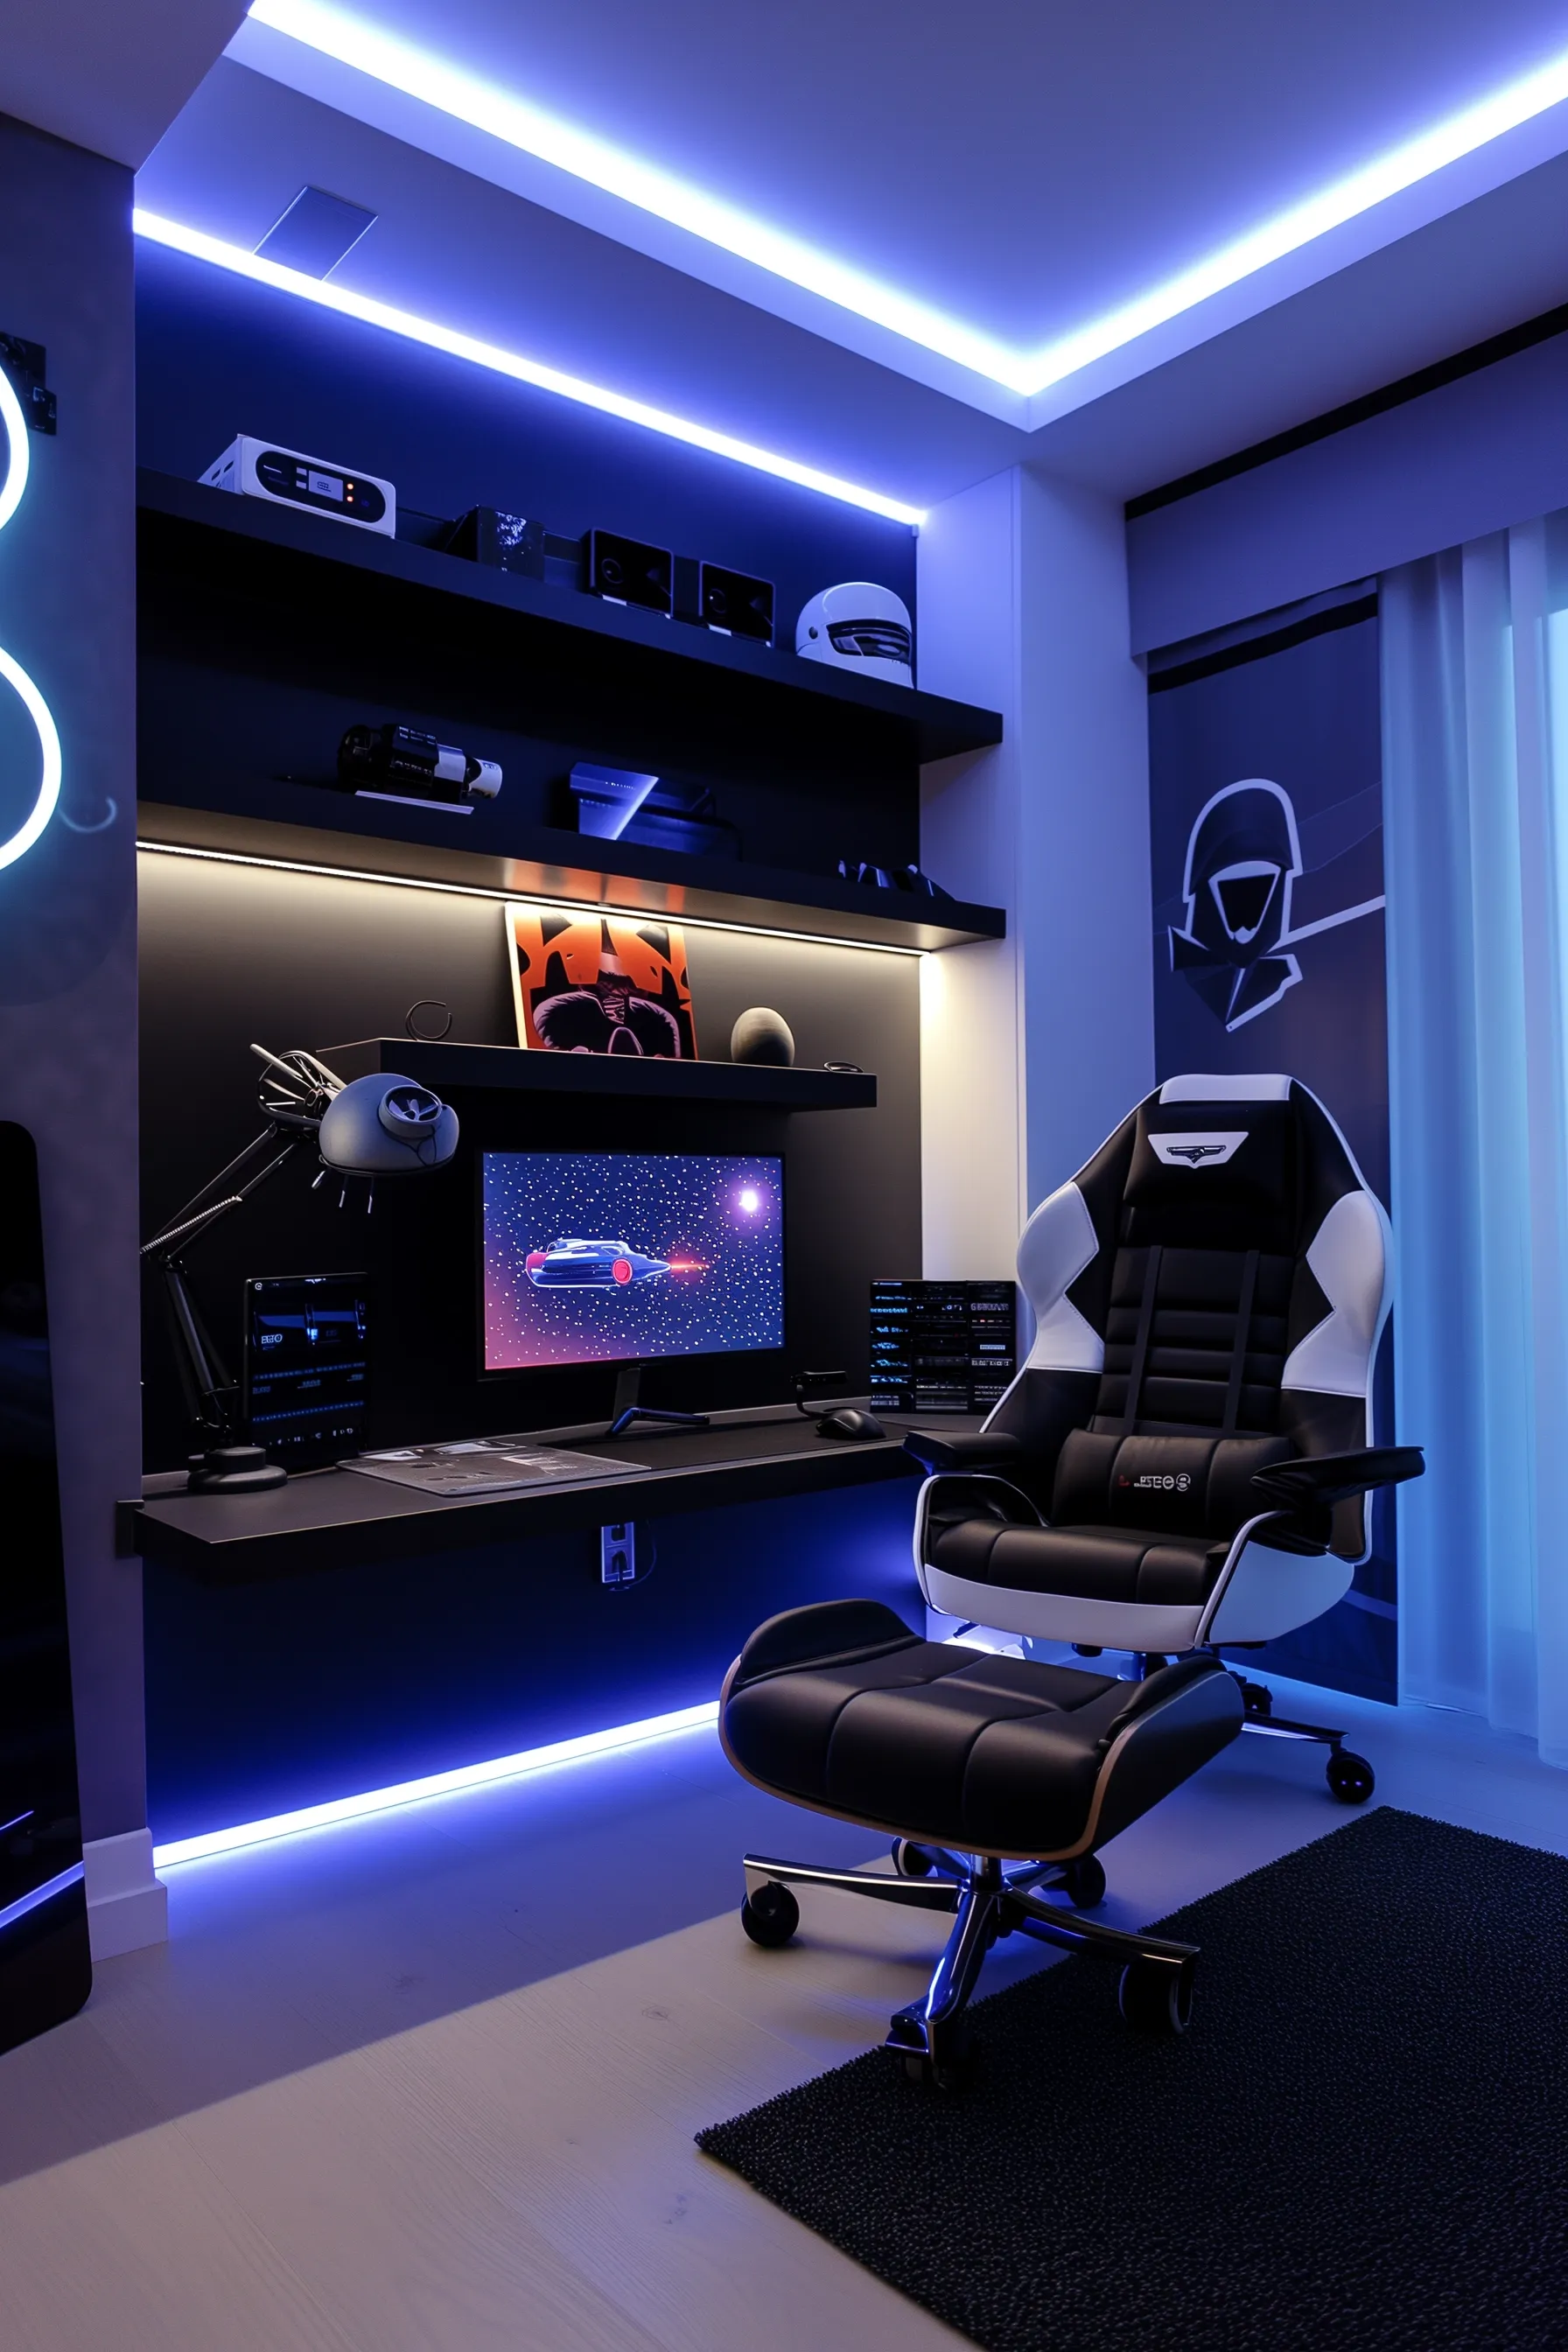 Blue LED lights, black gaming chair and a desk